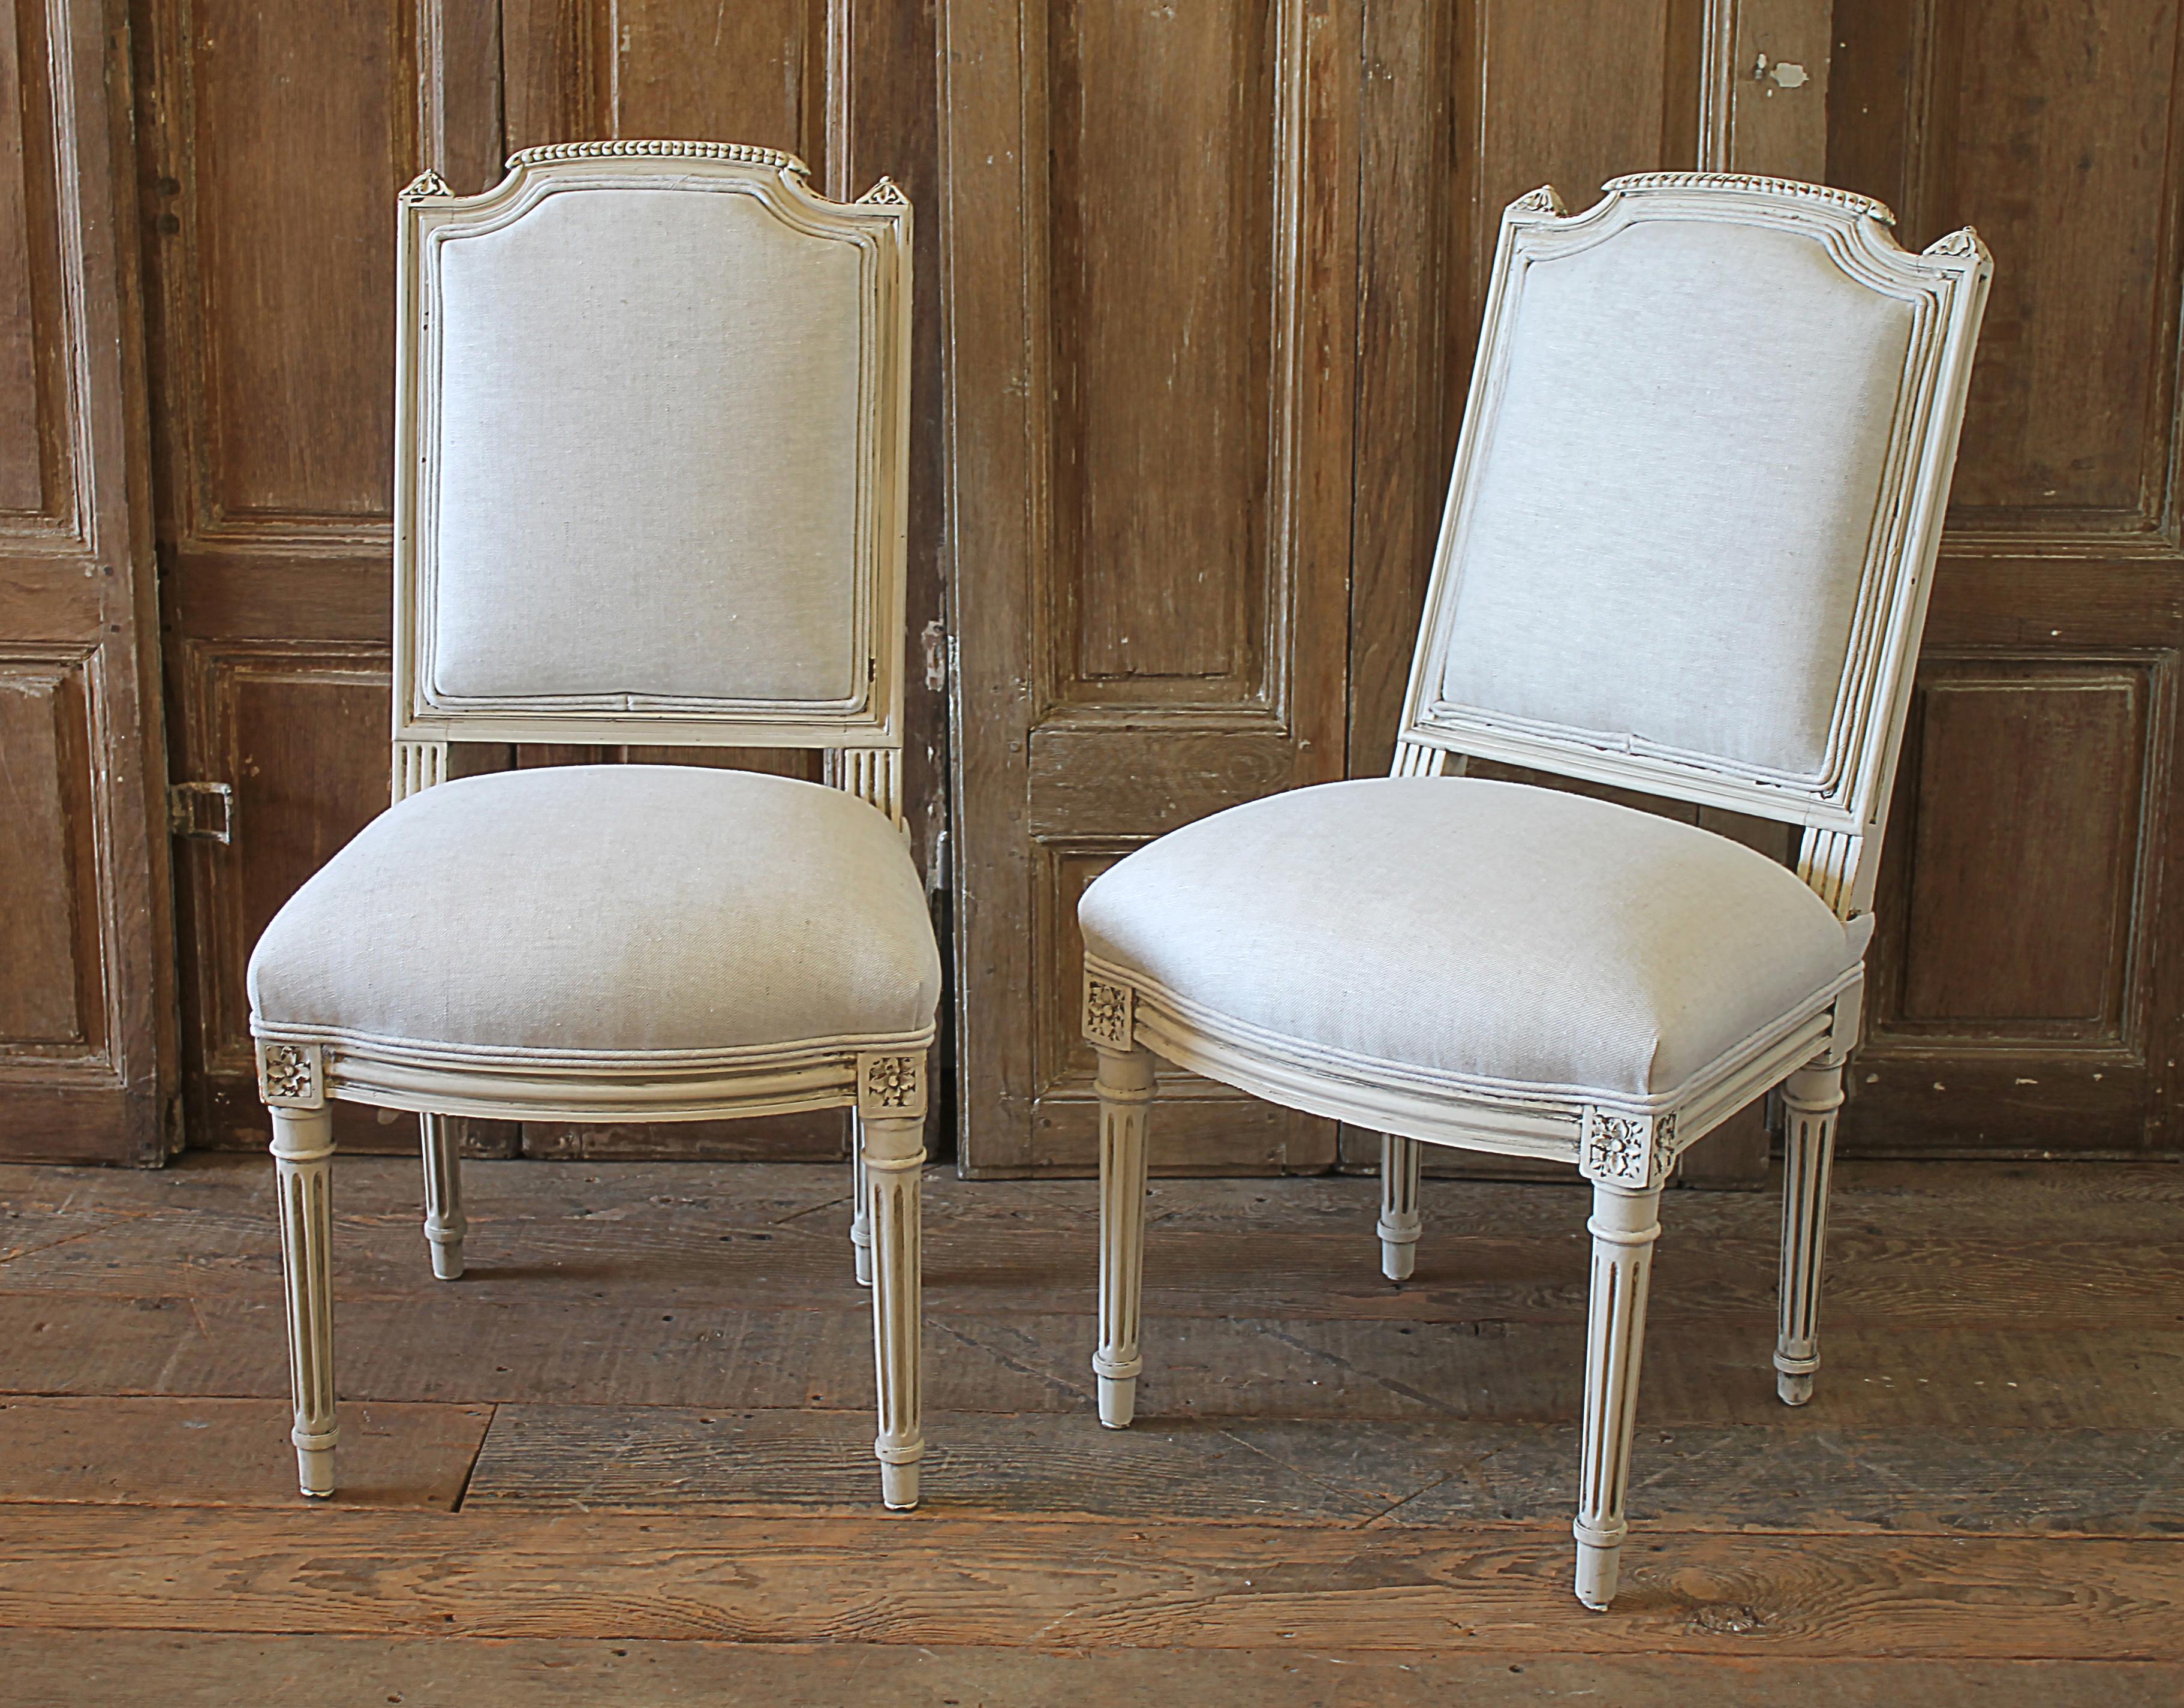 Very petite 20th century pair of painted chairs can be used for kids room. Beautiful pair of painted chairs in our oyster white finish, with subtle distressed edges, and finished with an antique glazed patina. Classic Louis XVI style. Reupholstered